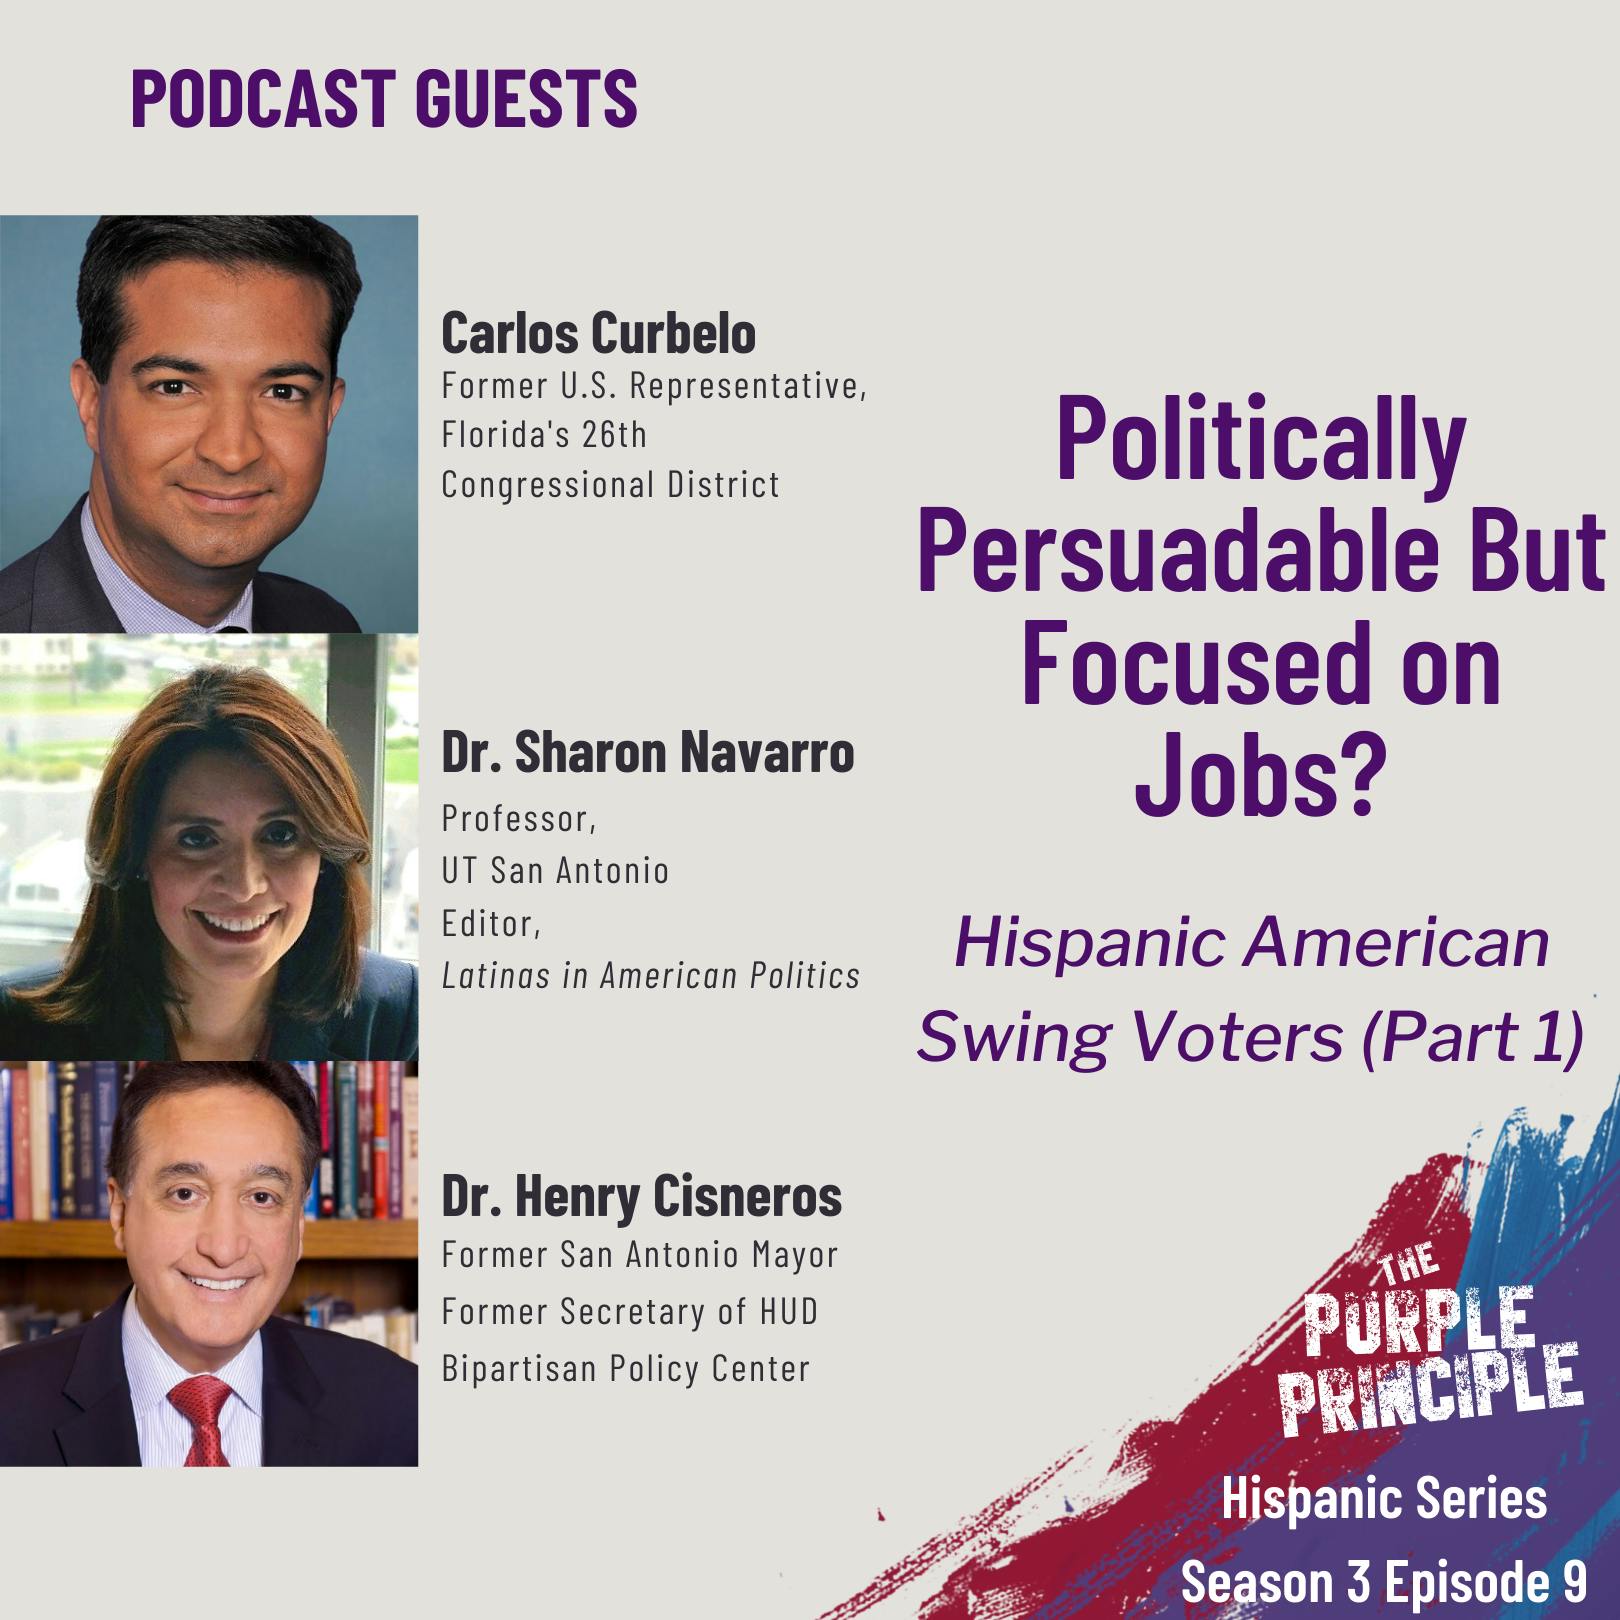 Politically Persuadable But Focused on Jobs? Hispanic American Swing Voters (Part 1)